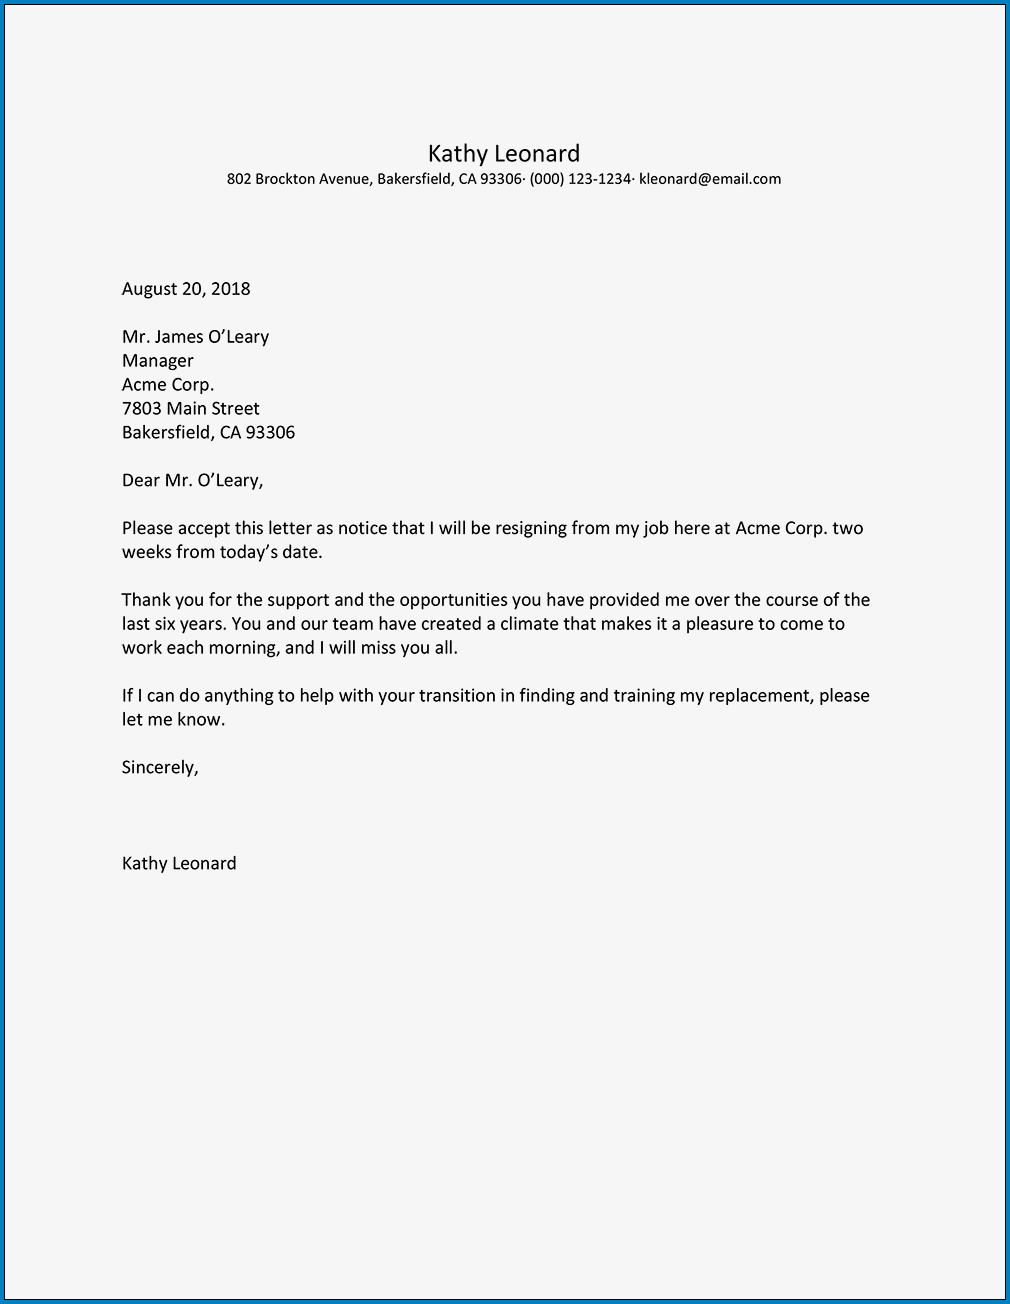 Resignation Letter 2 Week Notice Pdf from www.templateral.com